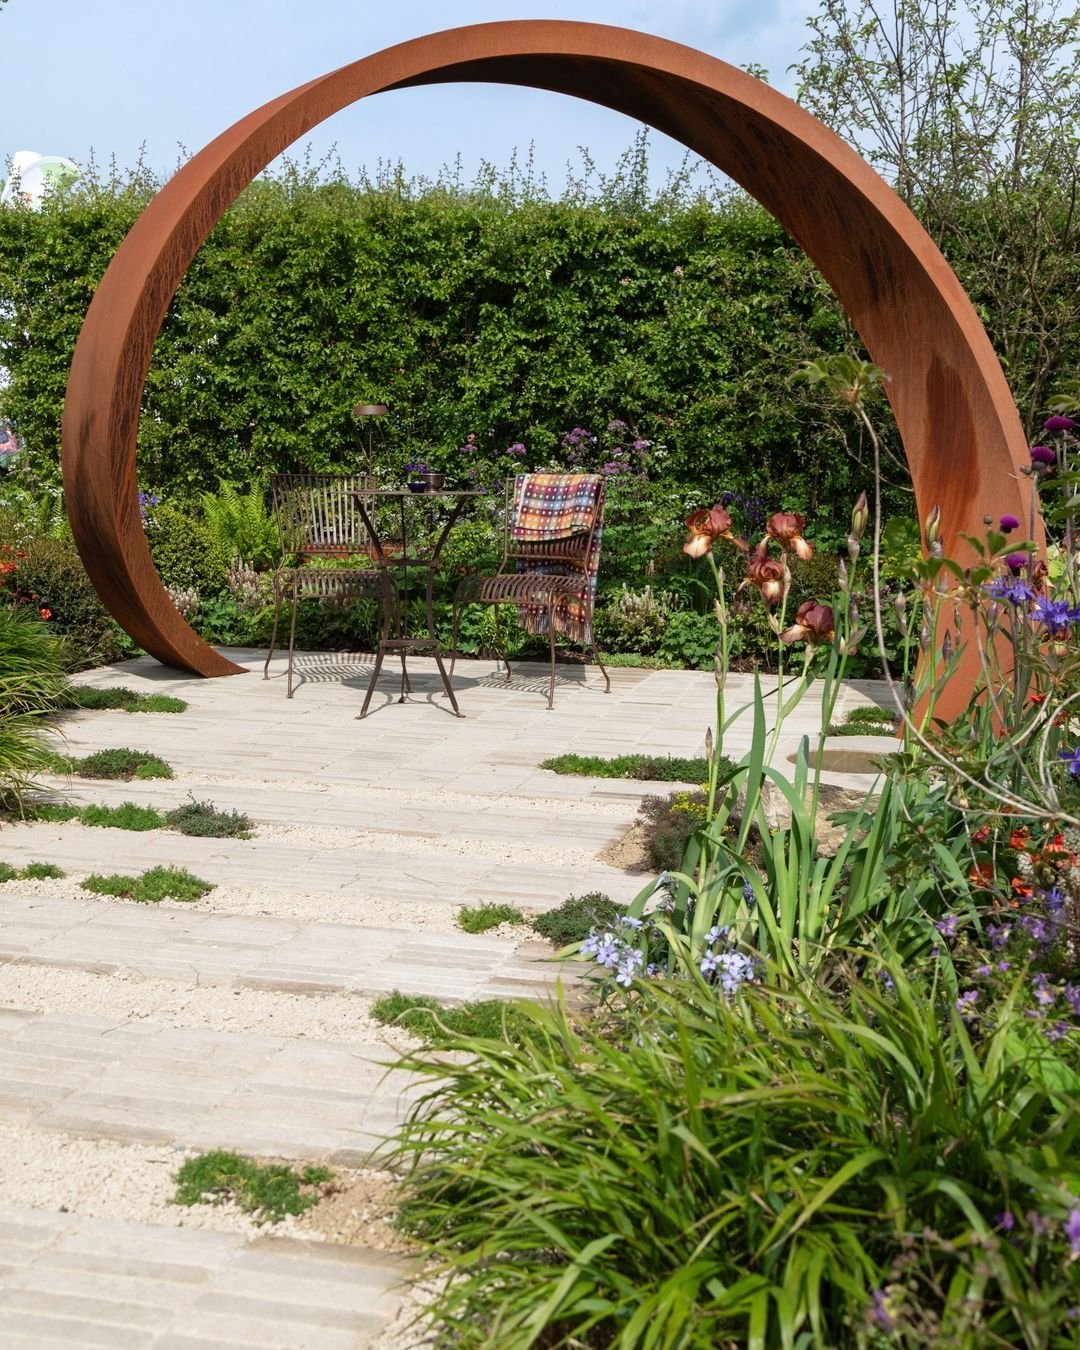 Another incredible Gold Medal winning garden from RHS Malvern Spring Festival 😍 
'It Doesn't Have To Cost The Earth' was designed to highlight the importance of soil health, biodiversity and sustainability and included our Recycled Bespoke Harewood 